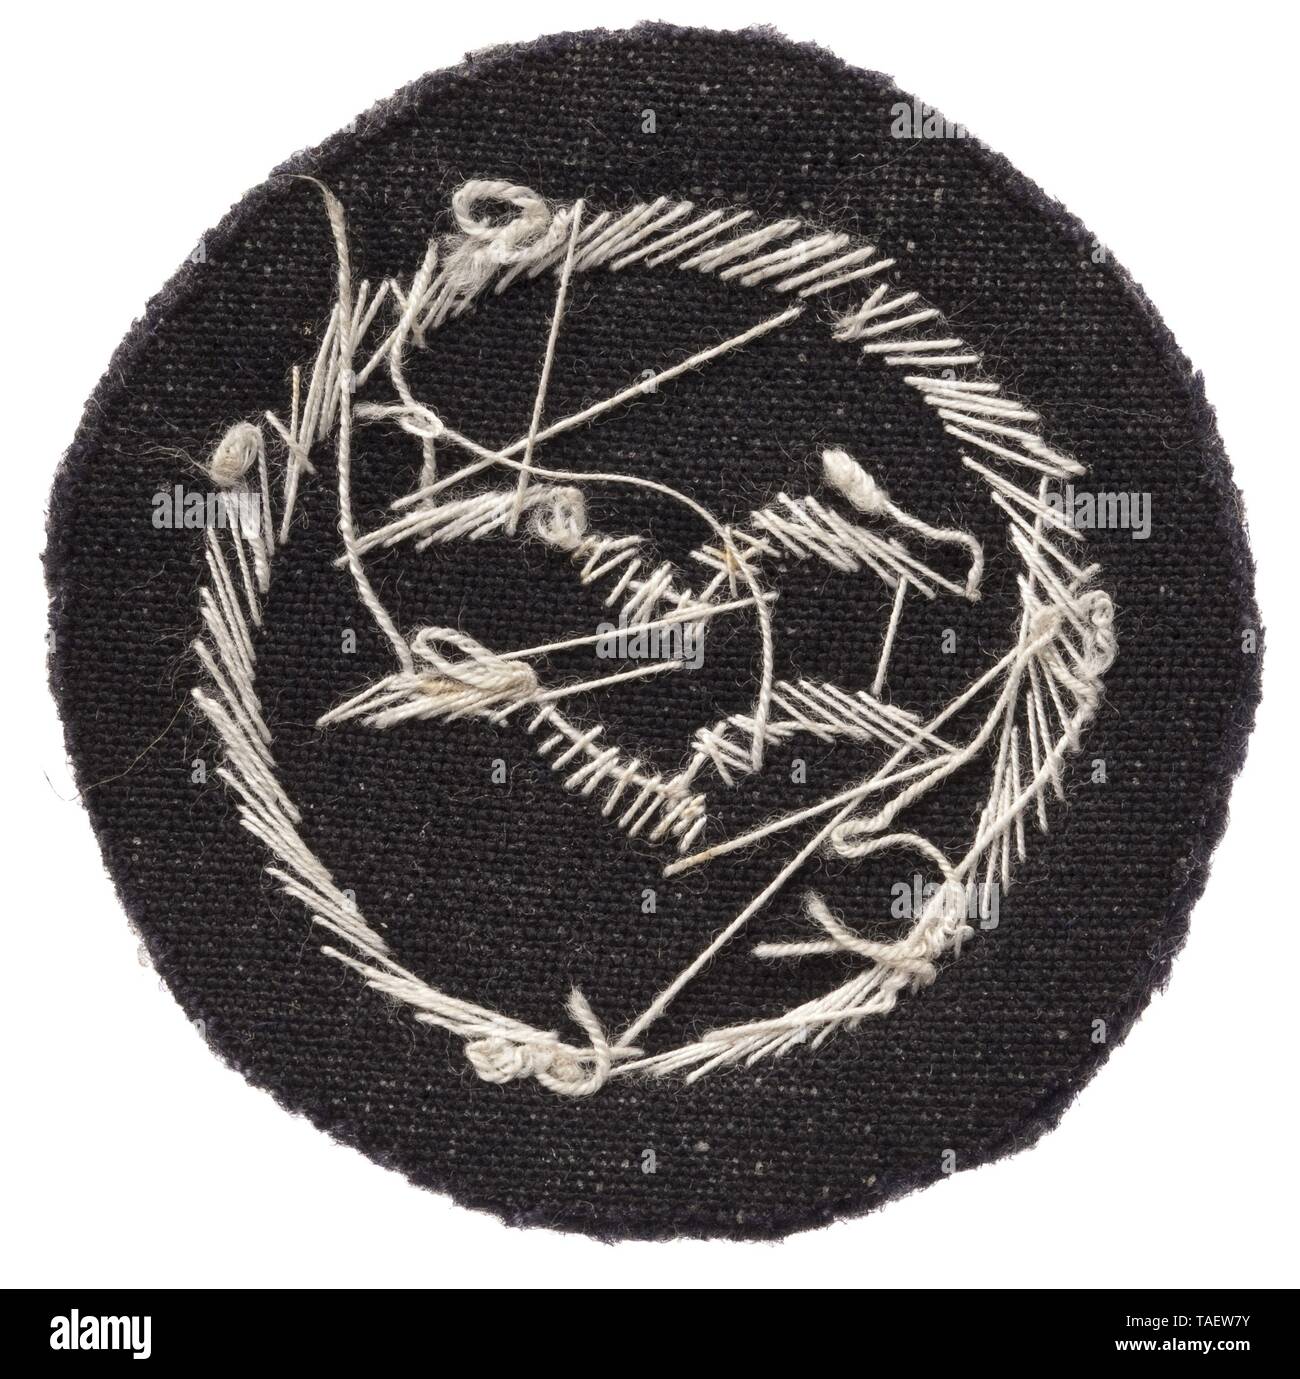 A glider pilot's badge 'B' certificate in officer quality cloth issue Zwei silberne, handgestickte Schwingen im Kranz auf grauem Wollfilz-Grund. Leichte Trage- und Altersspuren. Durchmesser 40 mm. historic, historical, Air Force, branch of service, branches of service, armed service, armed services, military, militaria, air forces, object, objects, stills, clipping, clippings, cut out, cut-out, cut-outs, 20th century, Editorial-Use-Only Stock Photo